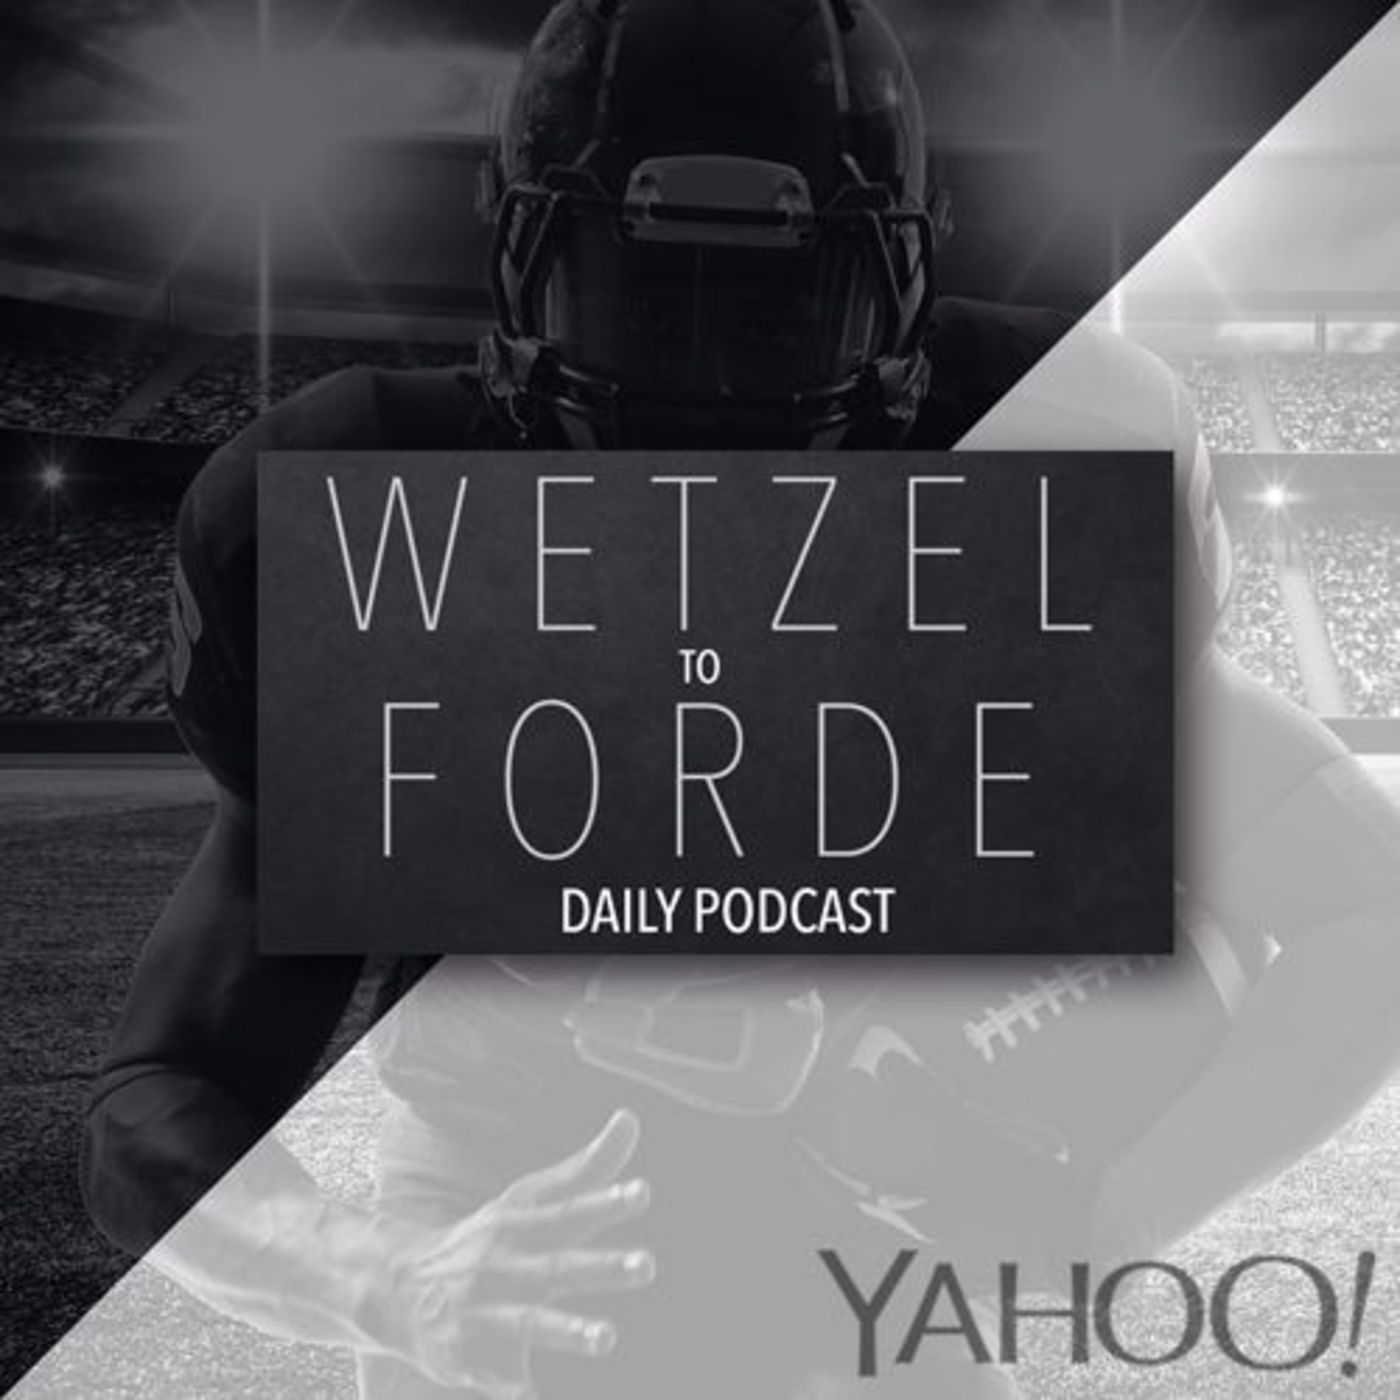 FULL SHOW: Coach K likes Beyonce? Can Pat name all Sun Belt teams? Wetzel To Forde (3 - 15 - 16)